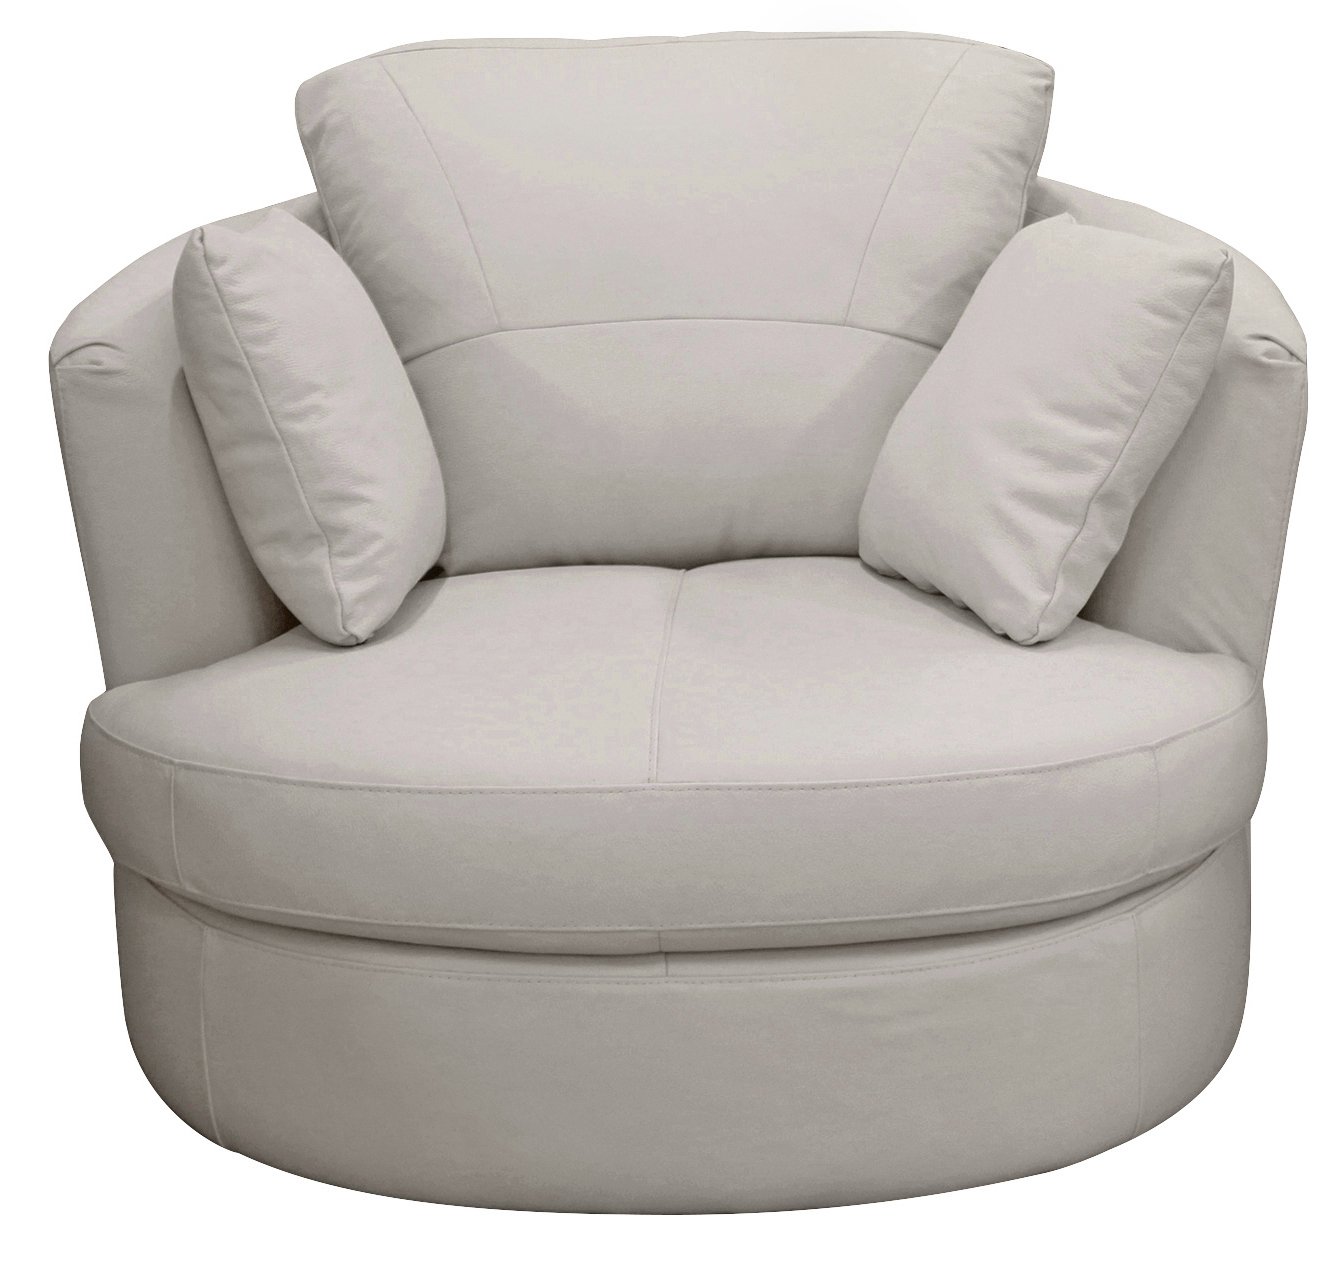 Argos Home Milano Leather Swivel Chair Reviews